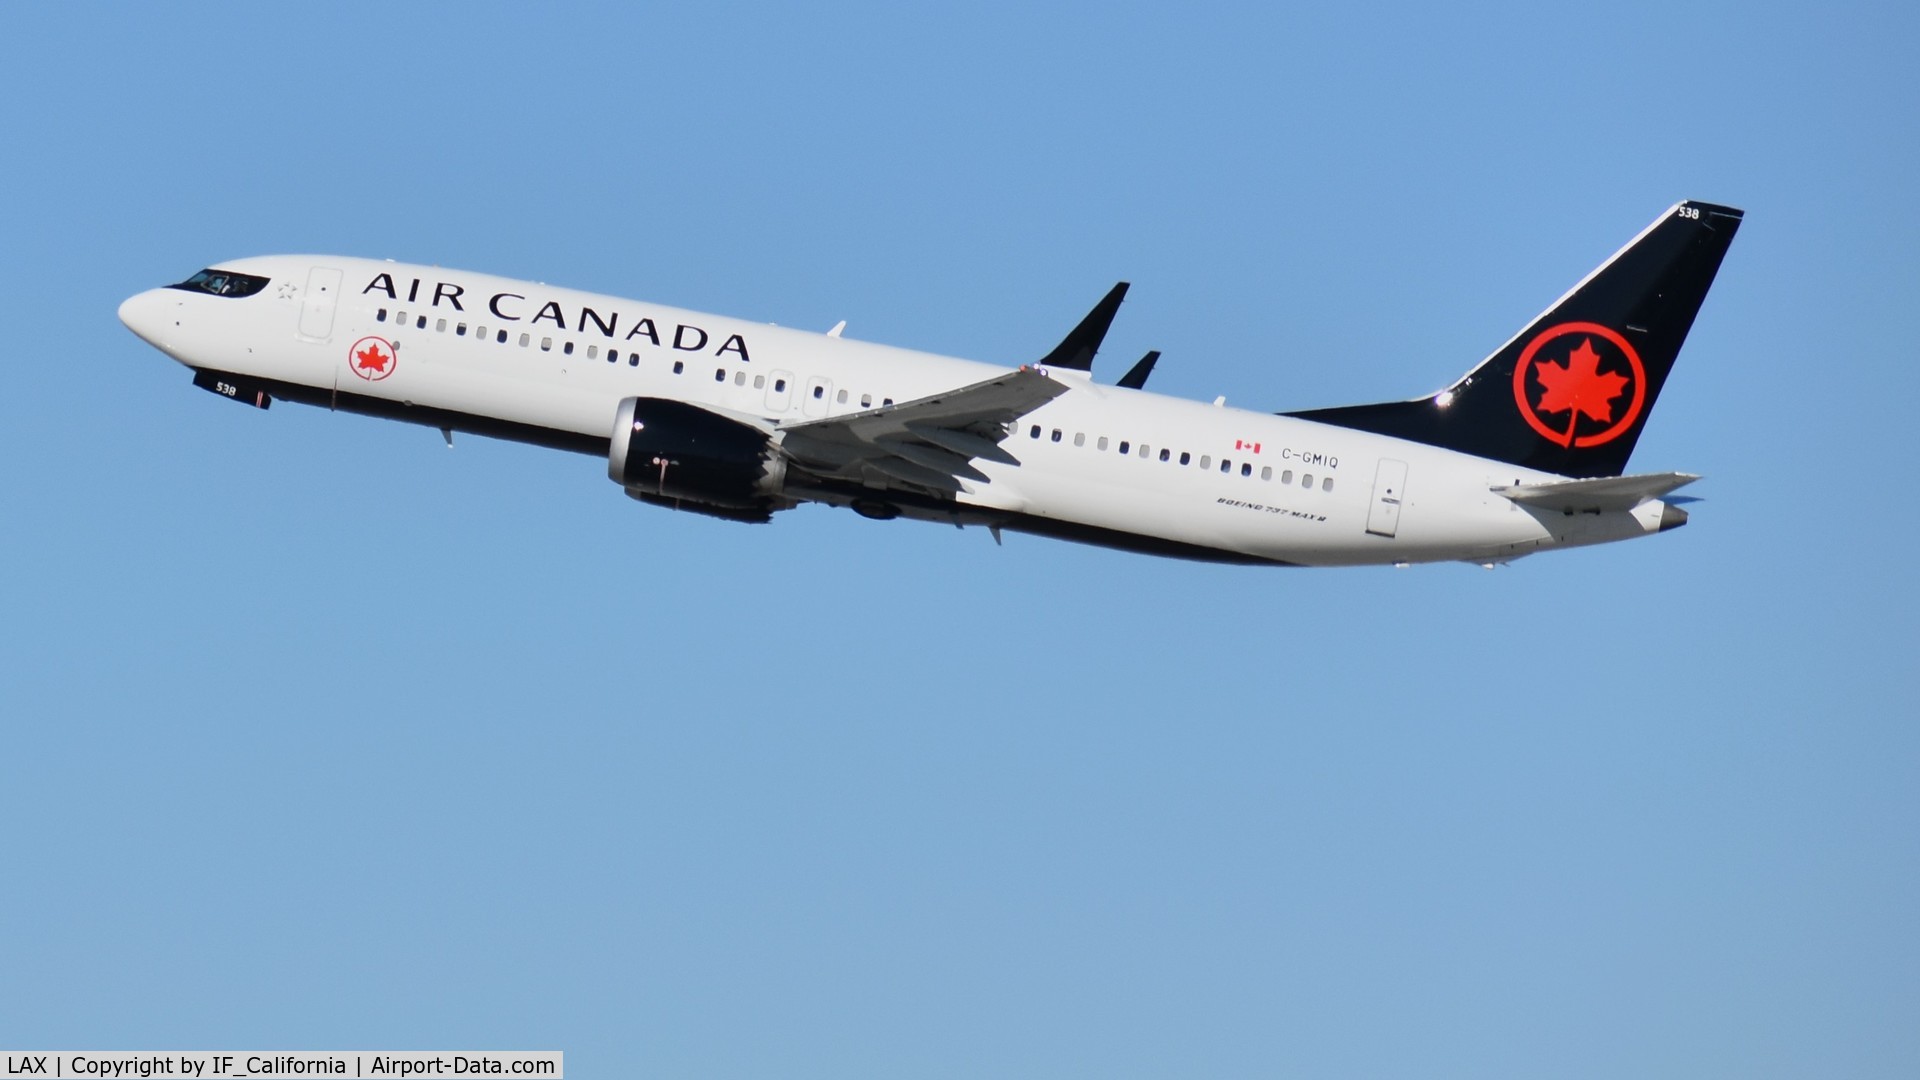 Los Angeles International Airport (LAX) - An Air Canada 737Max 8 departing to Montreal (YUL)